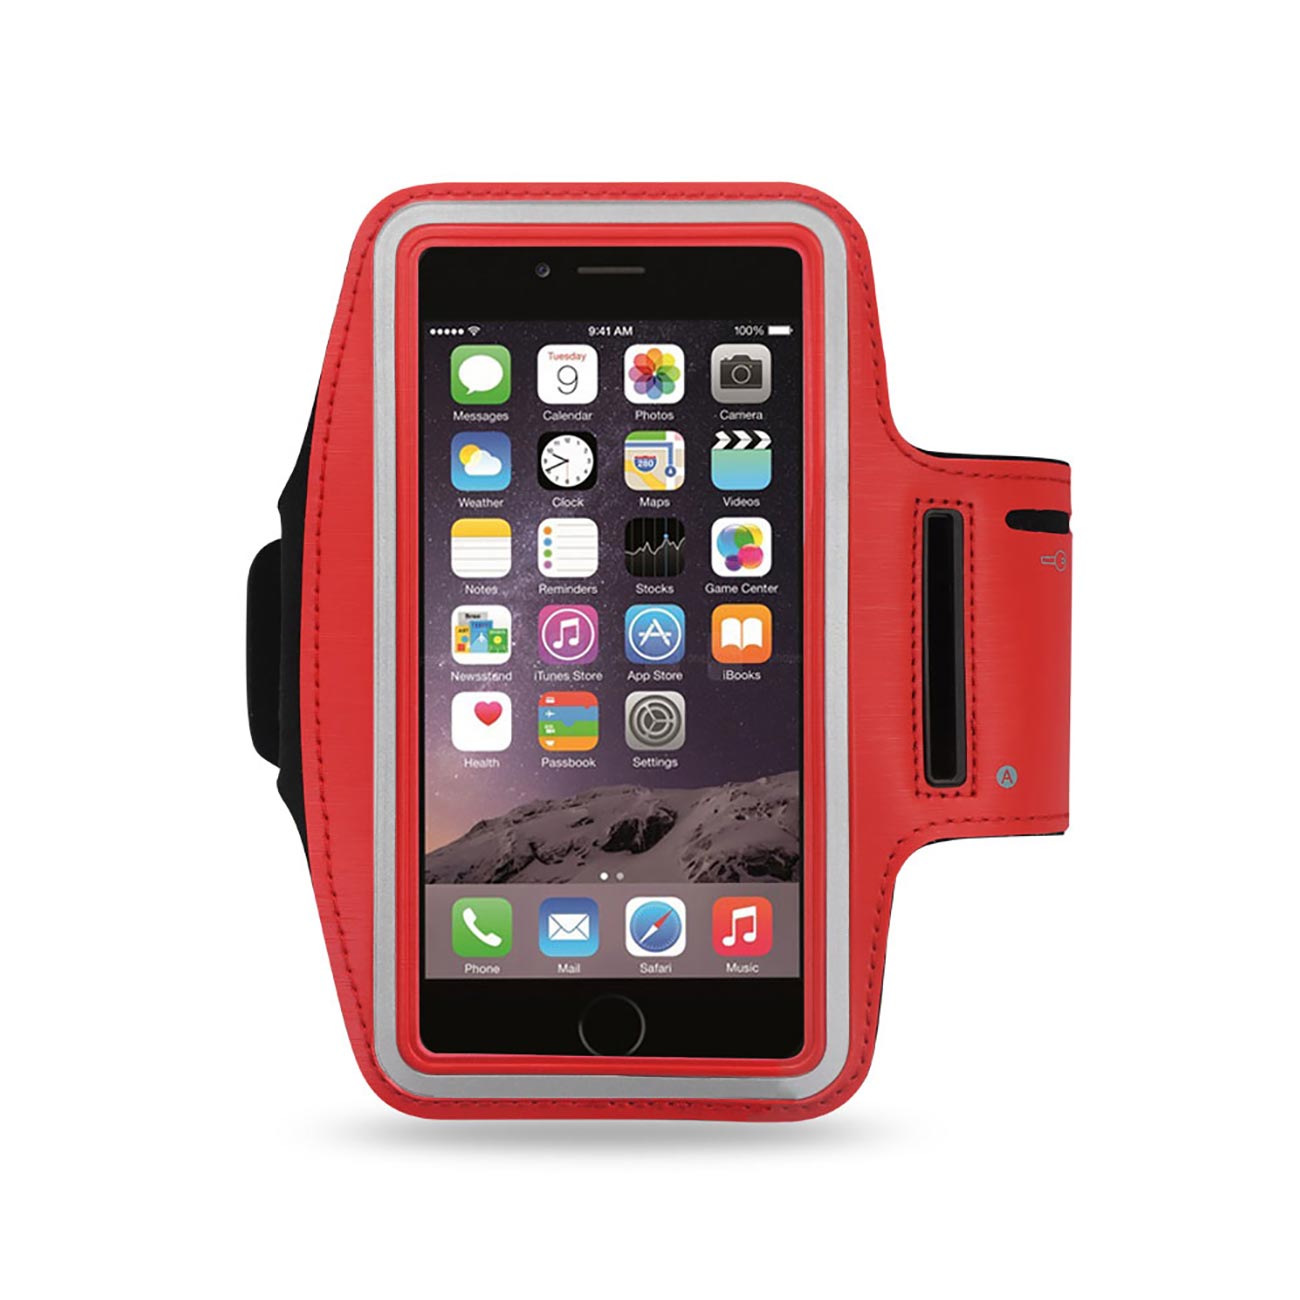 Case Touch Screen With Running Armband Reiko 6X3X0.75 Inches Red Color